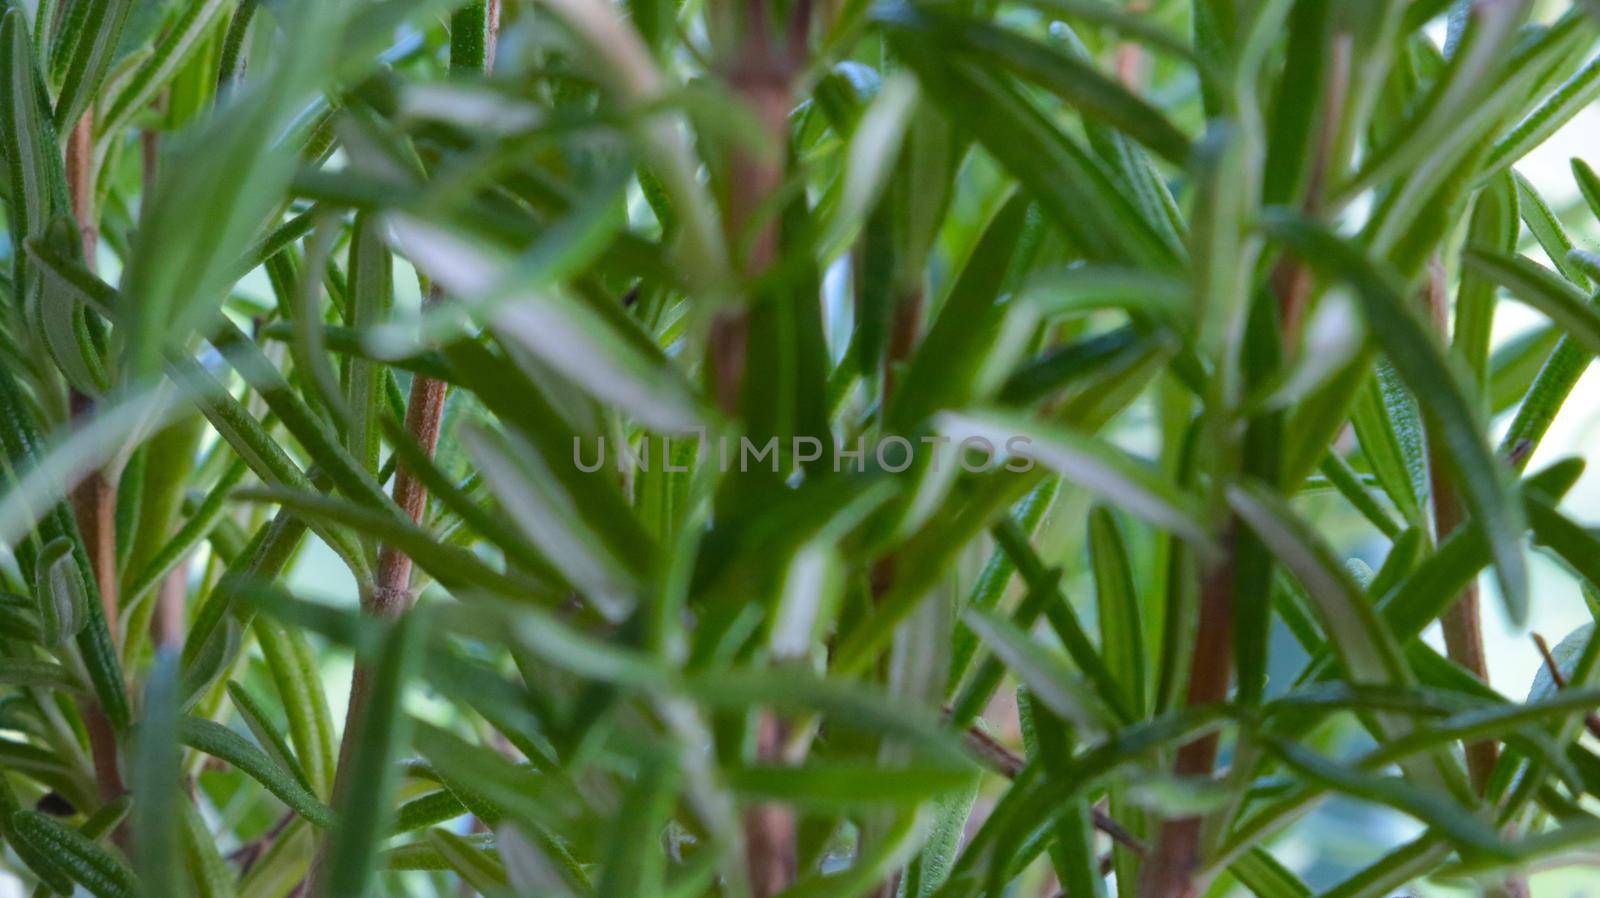 Out of focus, blurry background, green branches of rosemary